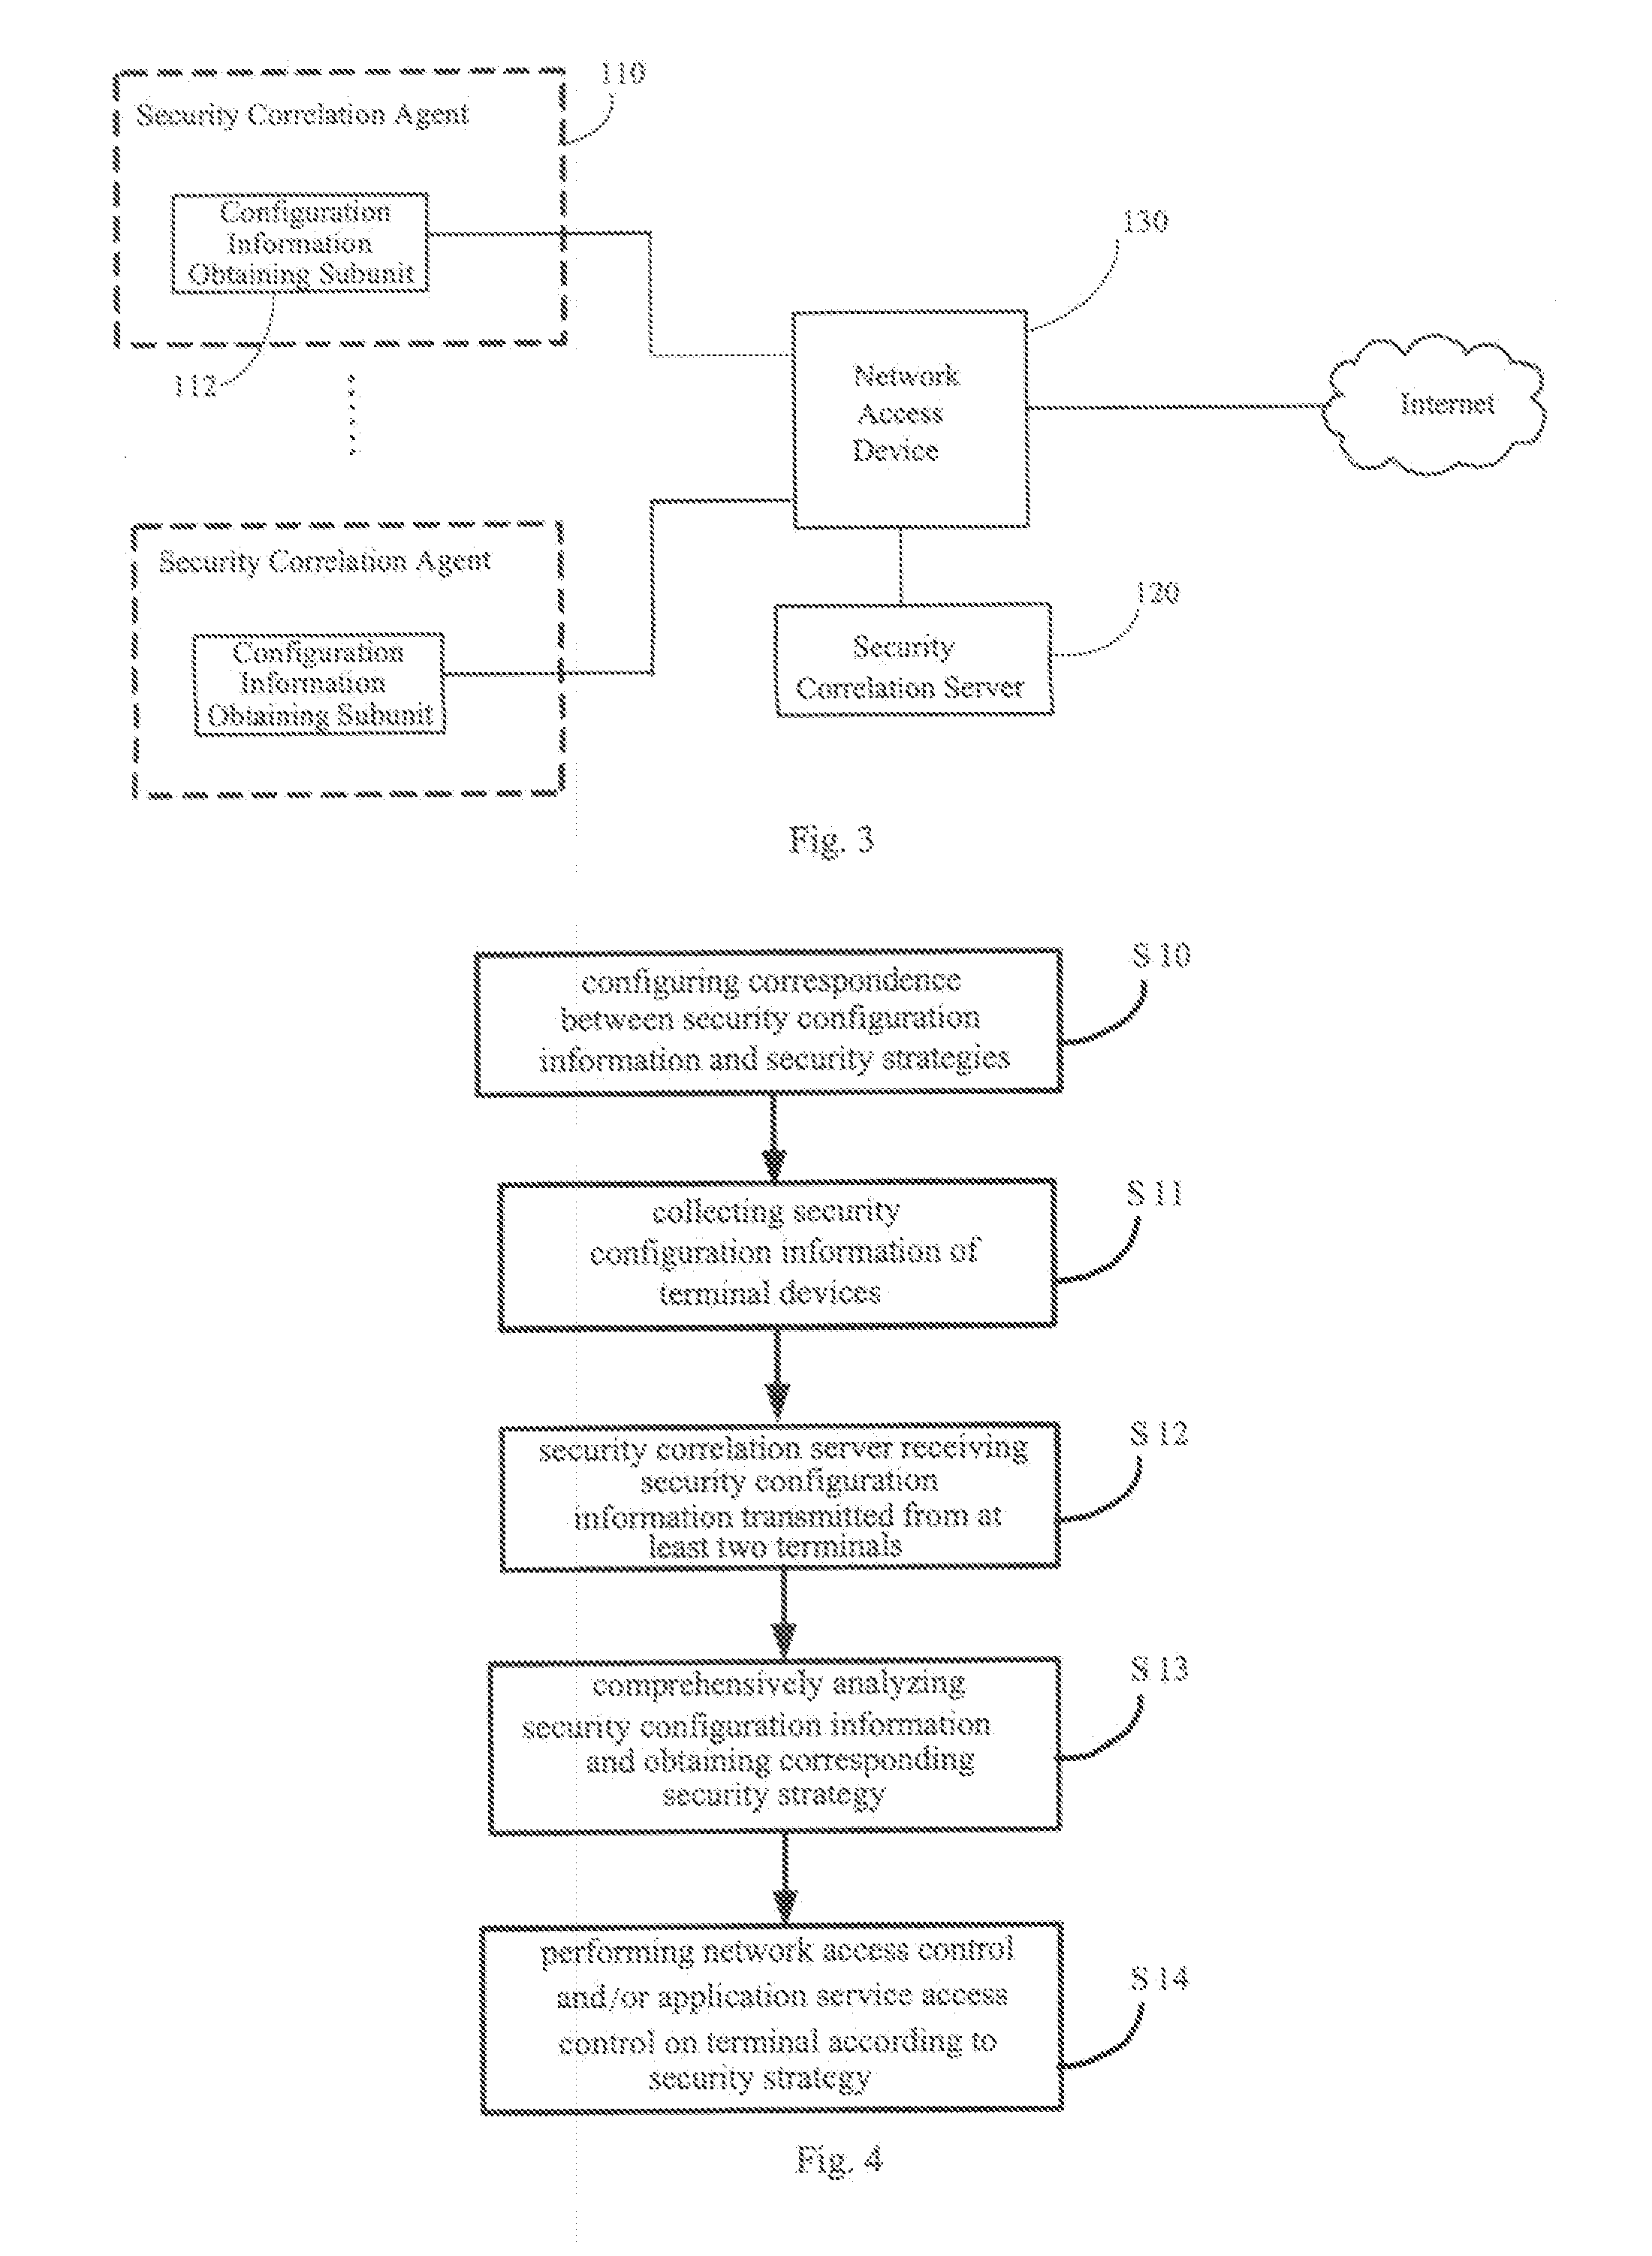 Method and System for Network Security Control